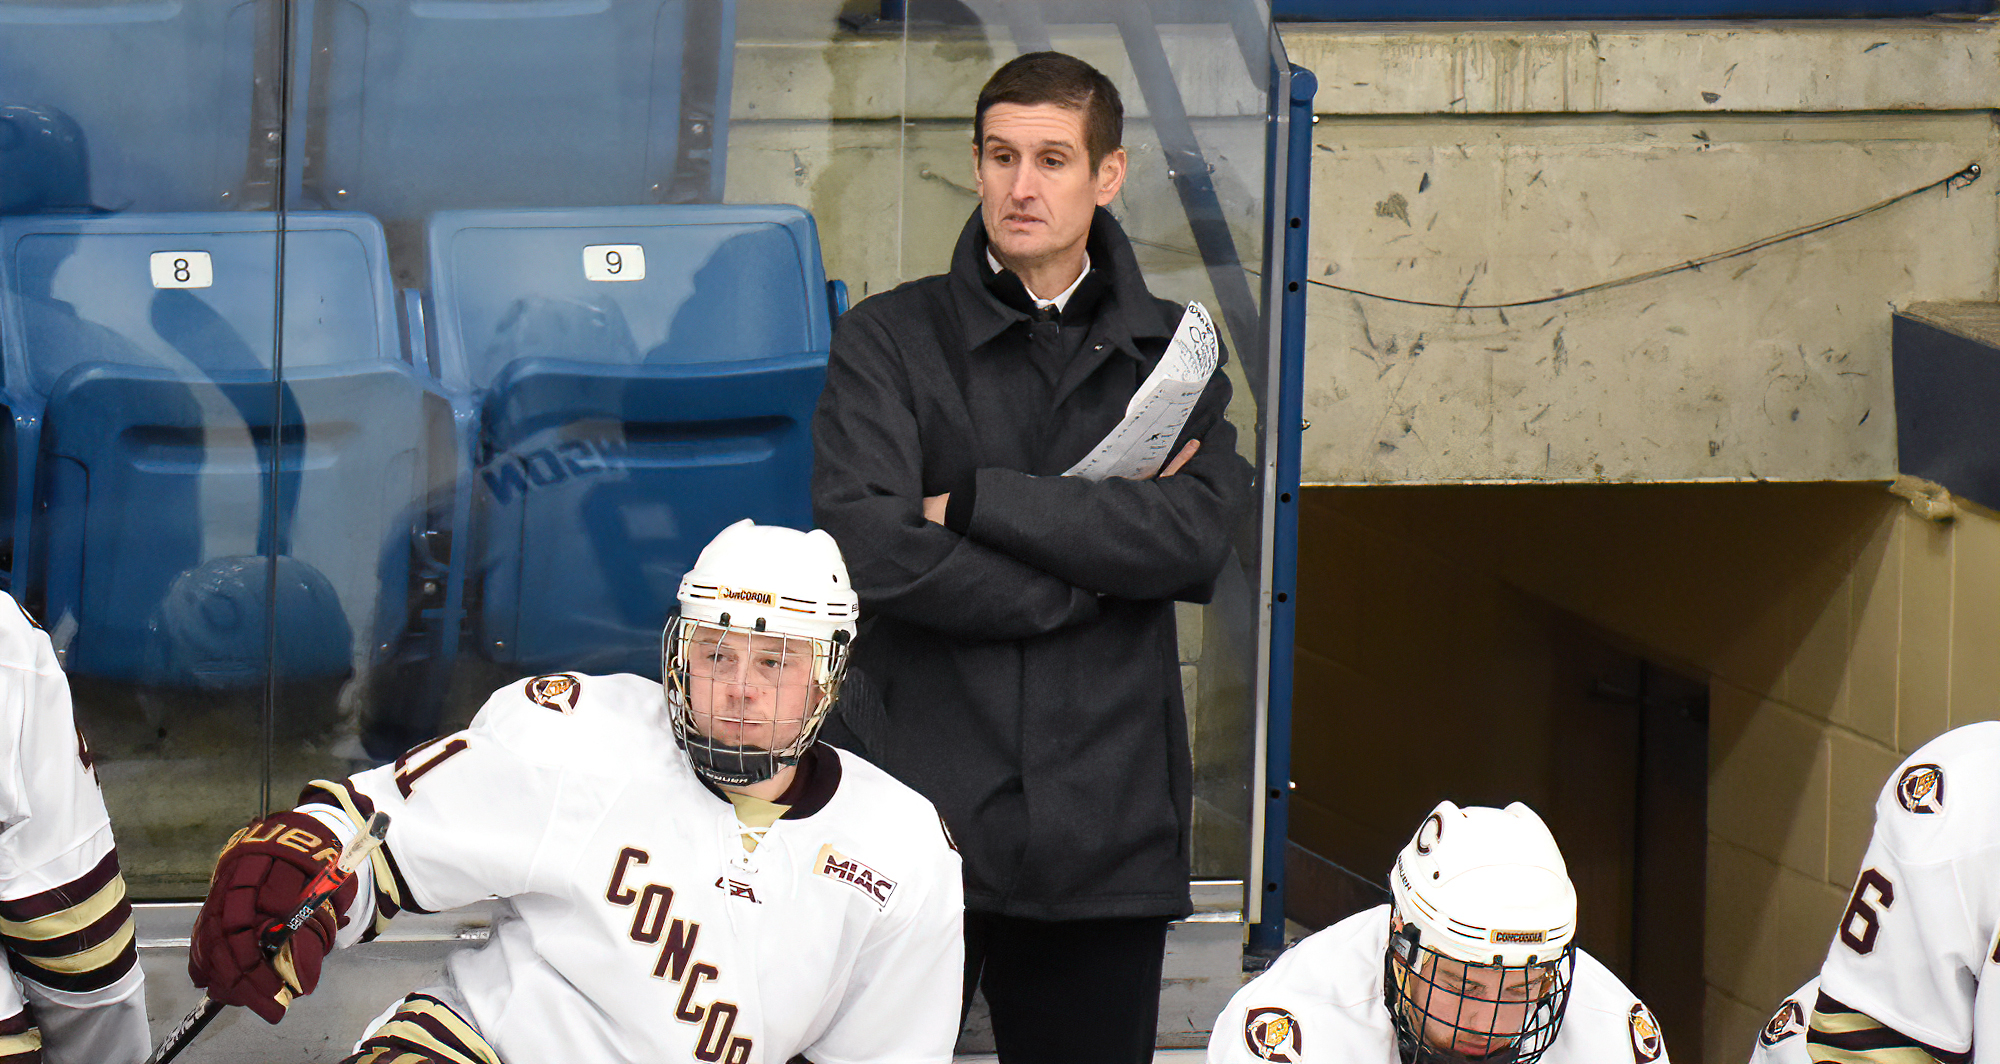 Chris Howe announced his resignation in order to pursue other coaching opportunities.